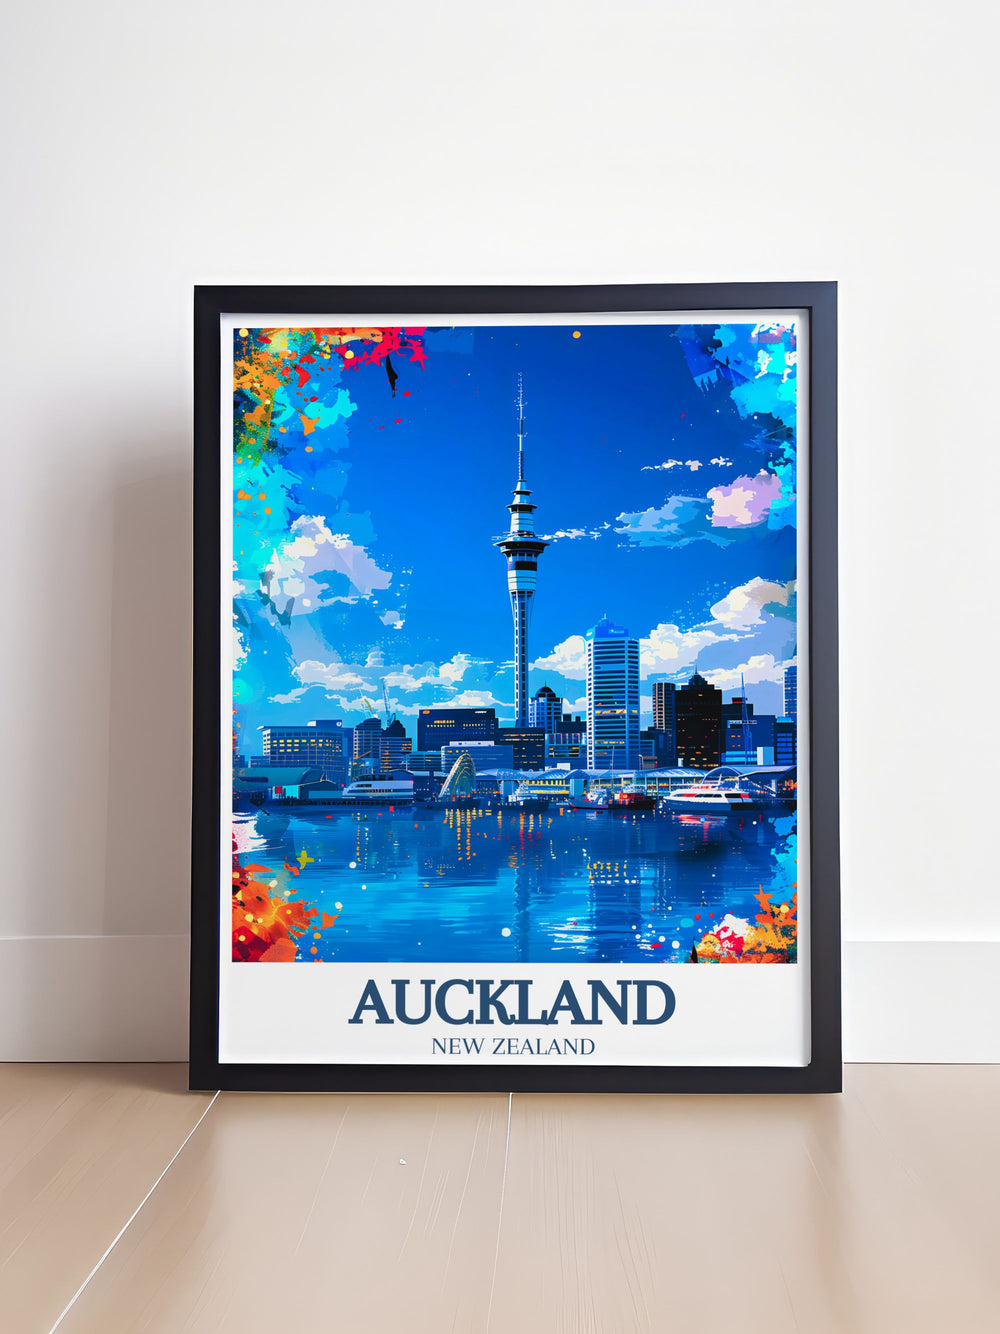 Beautiful New Zealand print showcasing Aucklands skyline and Waitematā Harbour, highlighting the citys blend of natural and urban landscapes. Ideal for adding a touch of New Zealands picturesque scenery to your living space or as a thoughtful gift.